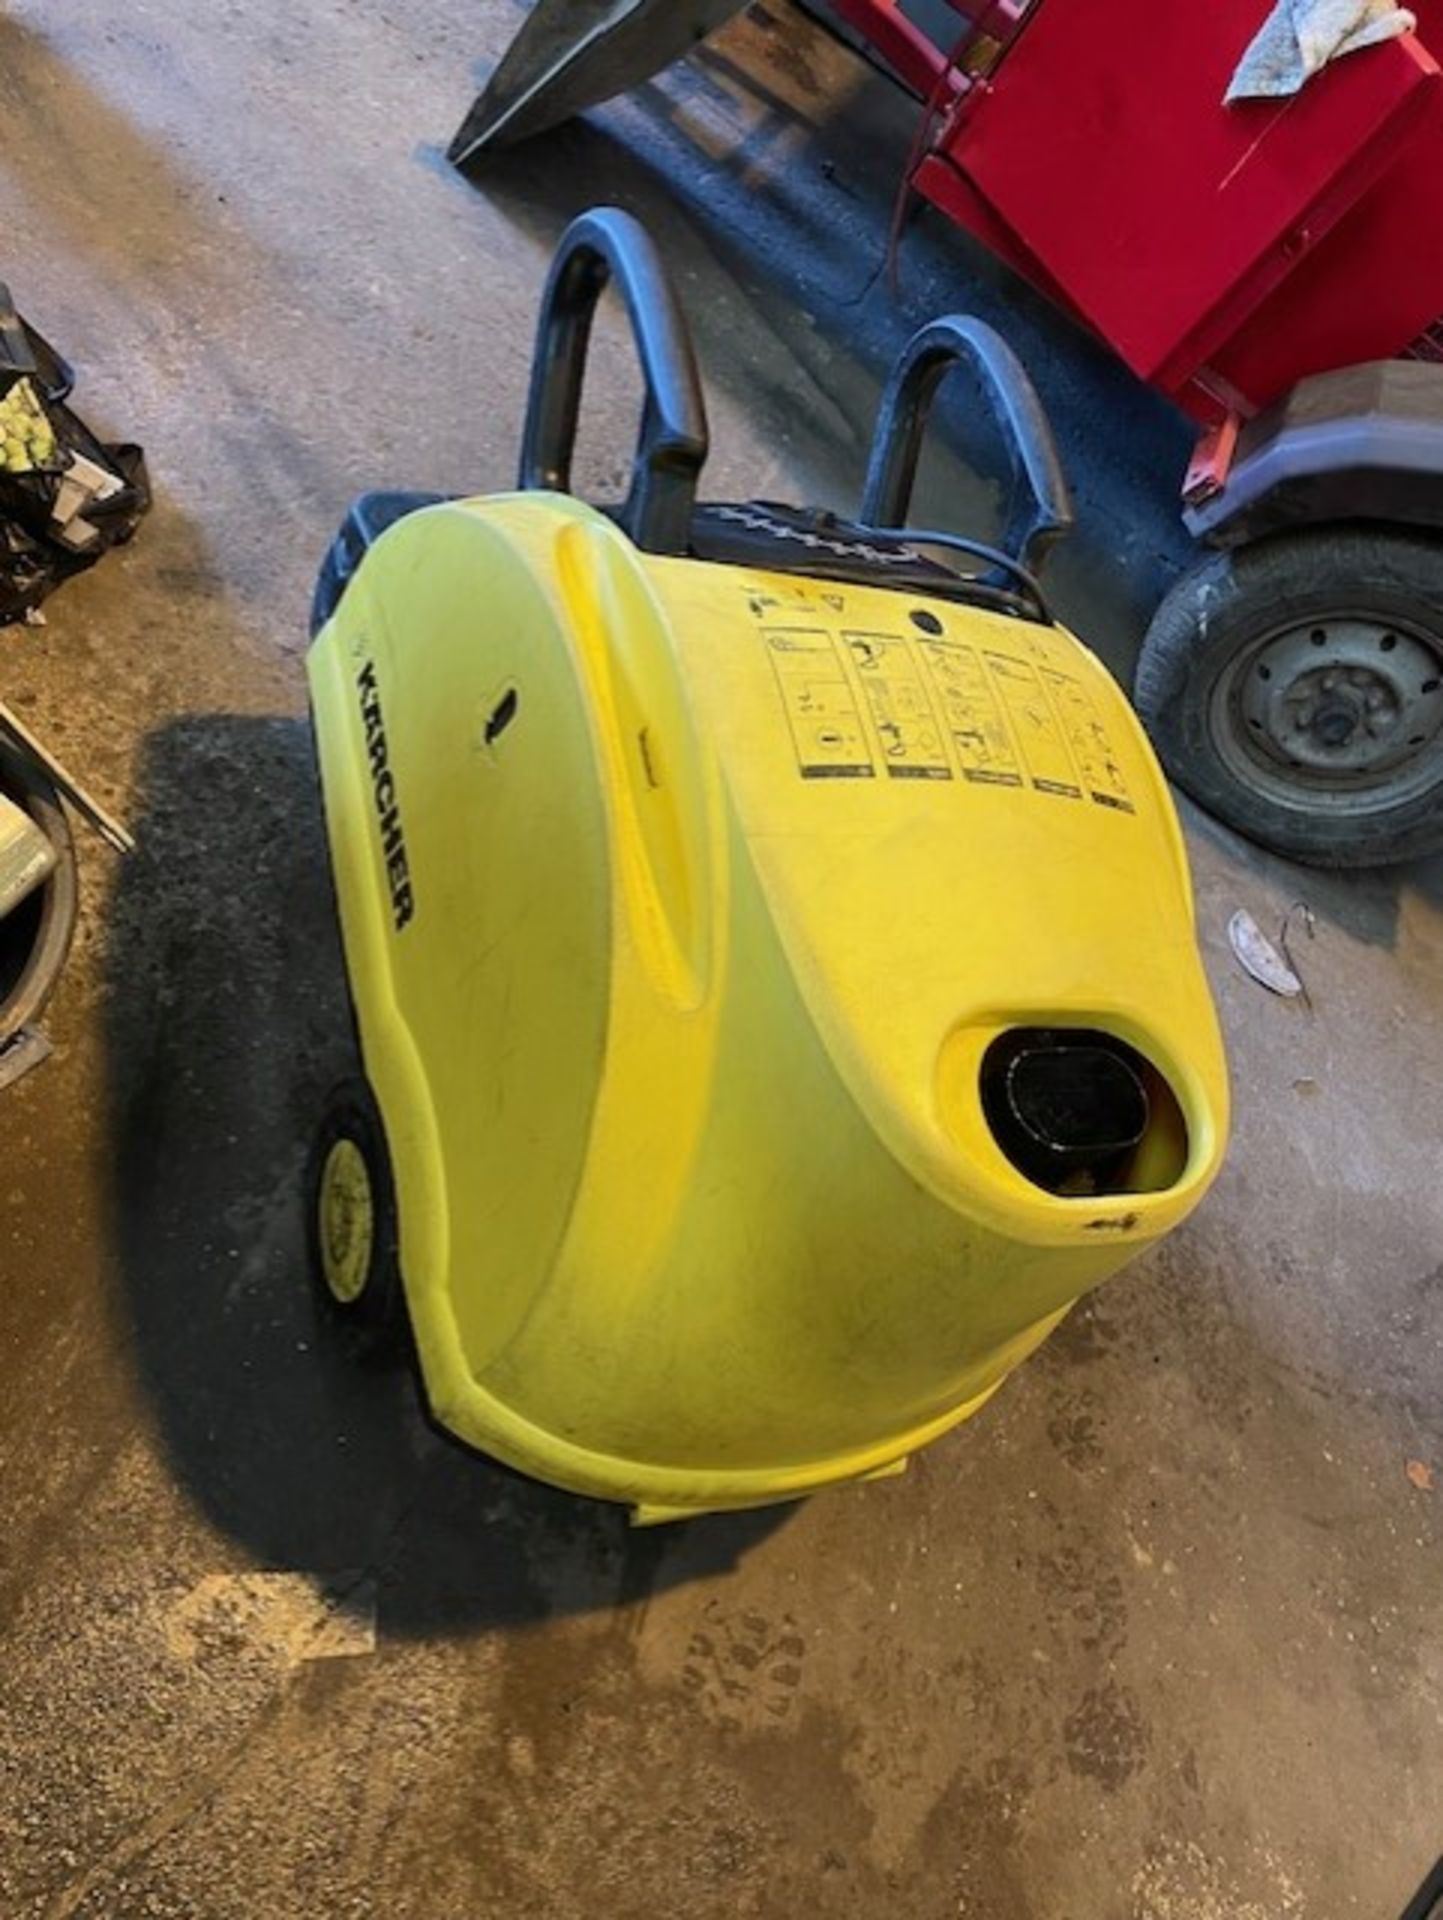 Karcher hot and cold pressure washer hds551 c model it’s in good condition still comes with hose and - Bild 10 aus 10